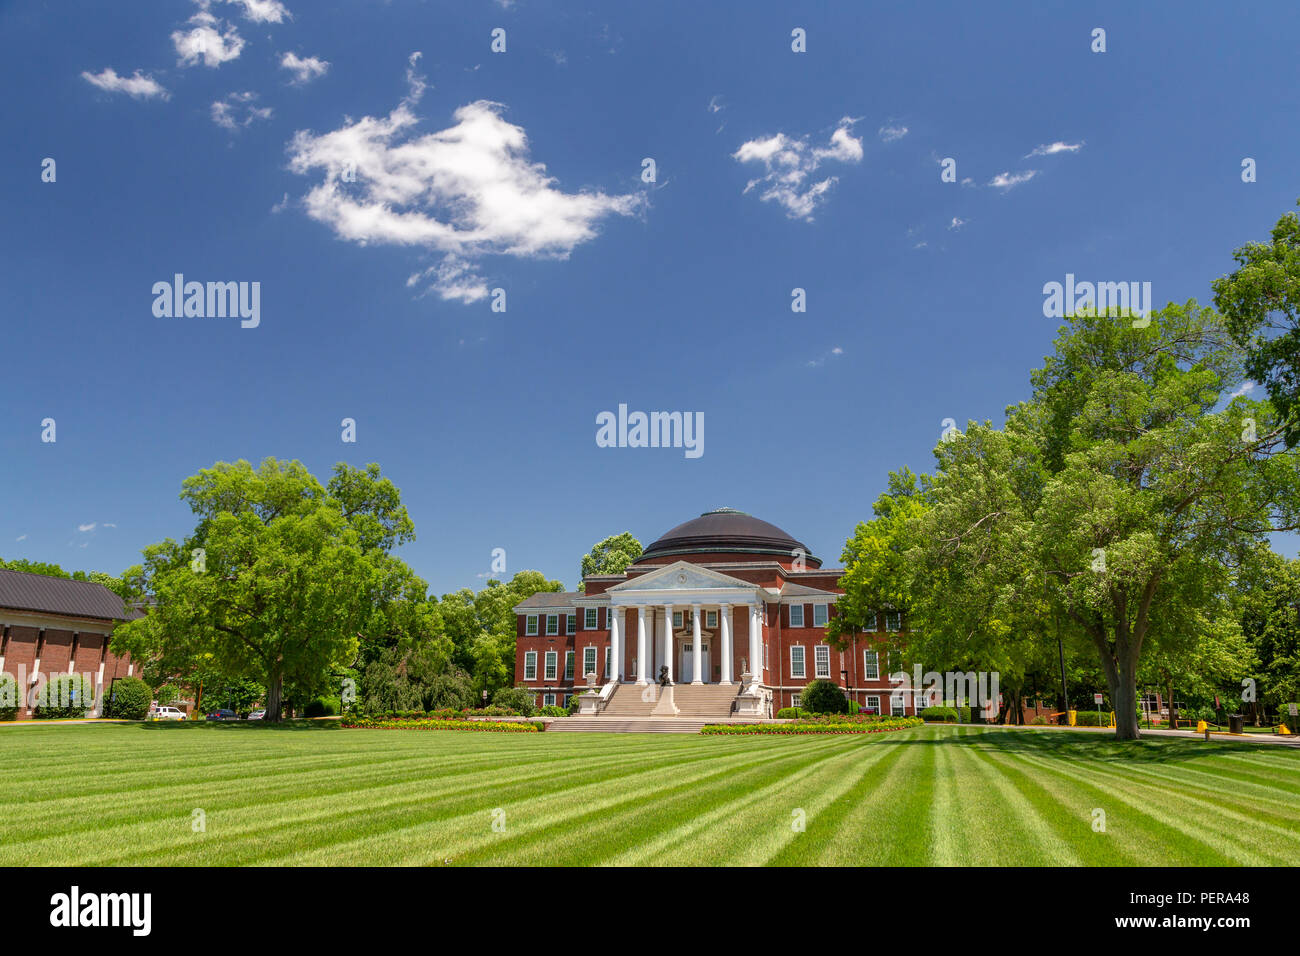 LOUISVILLE, KY/USA JUNE 3, 2018: Grawemeyer Hall on the campus of the University of Louisville. Stock Photo